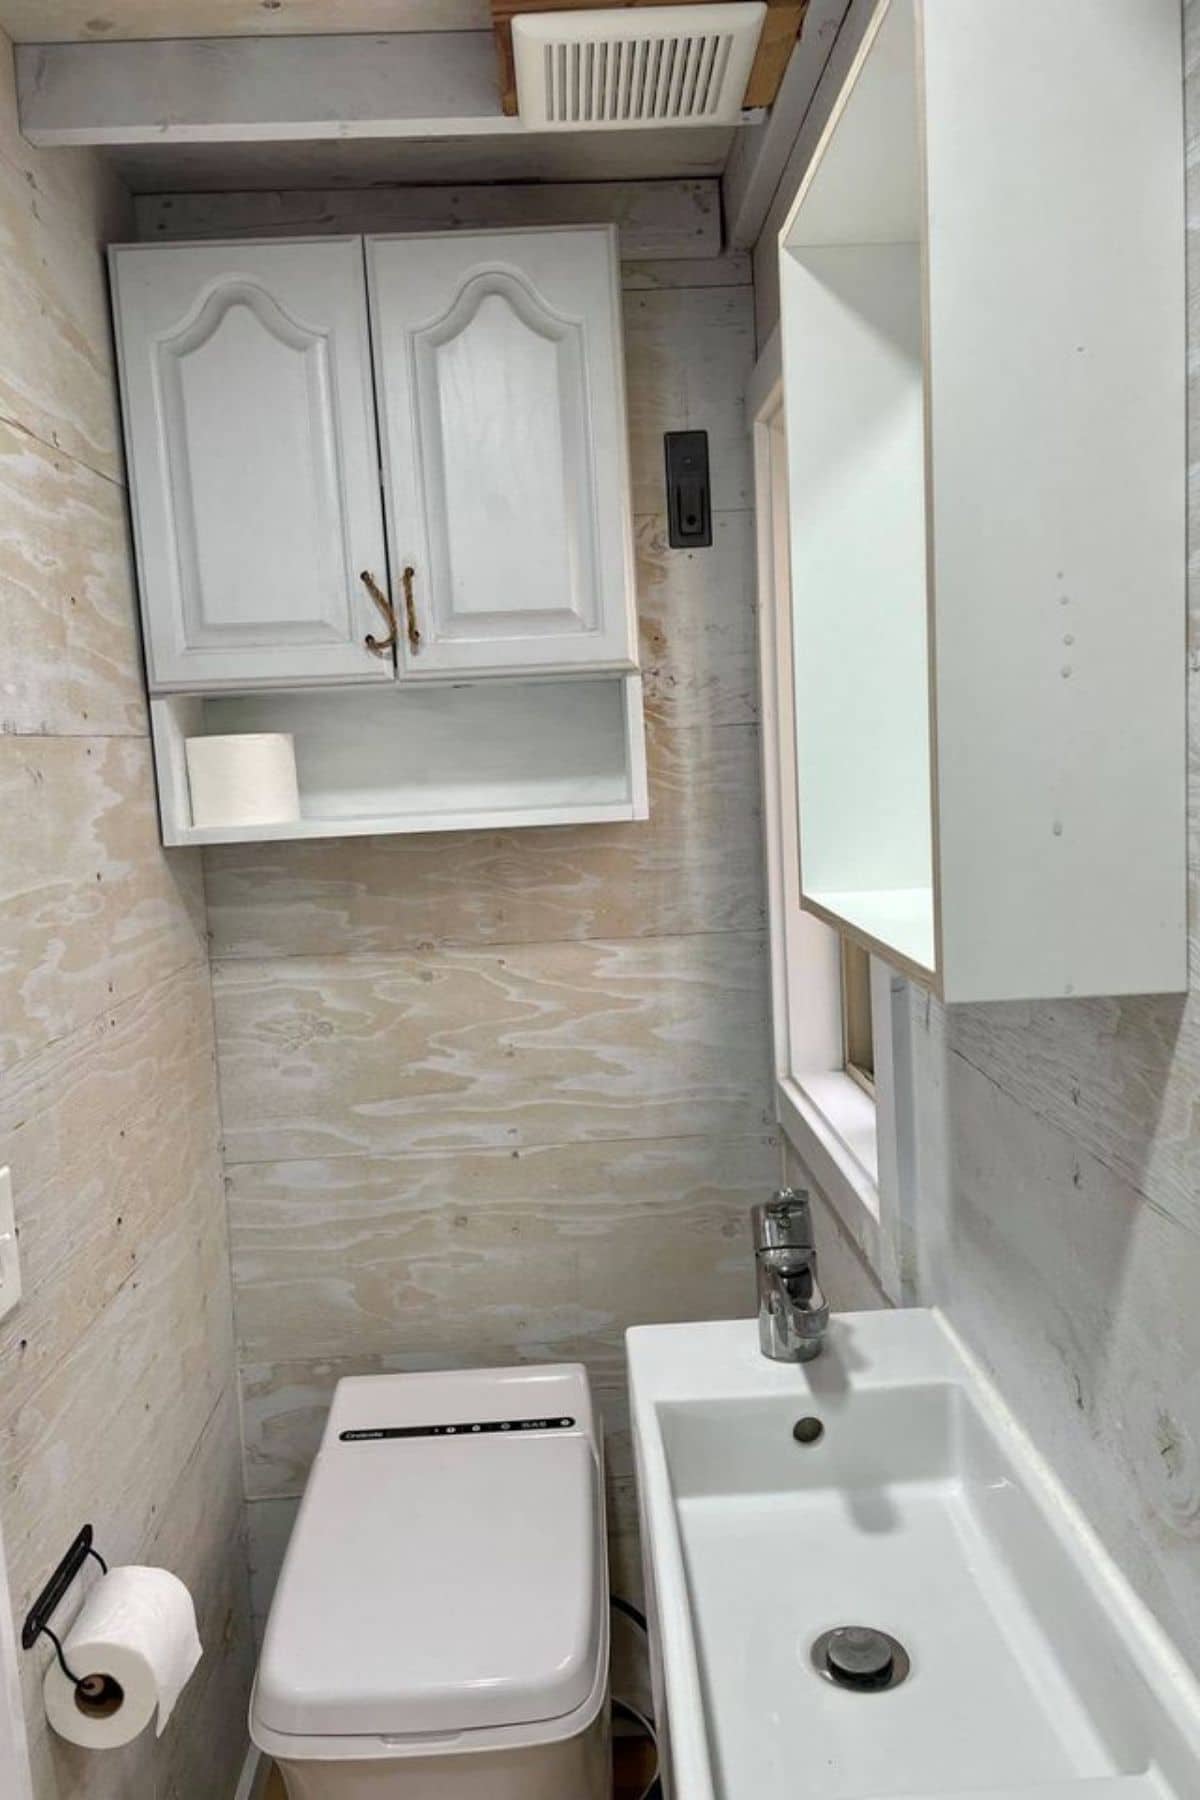 white cabinet on wall above incinerator toilet next to white sink in bathroom